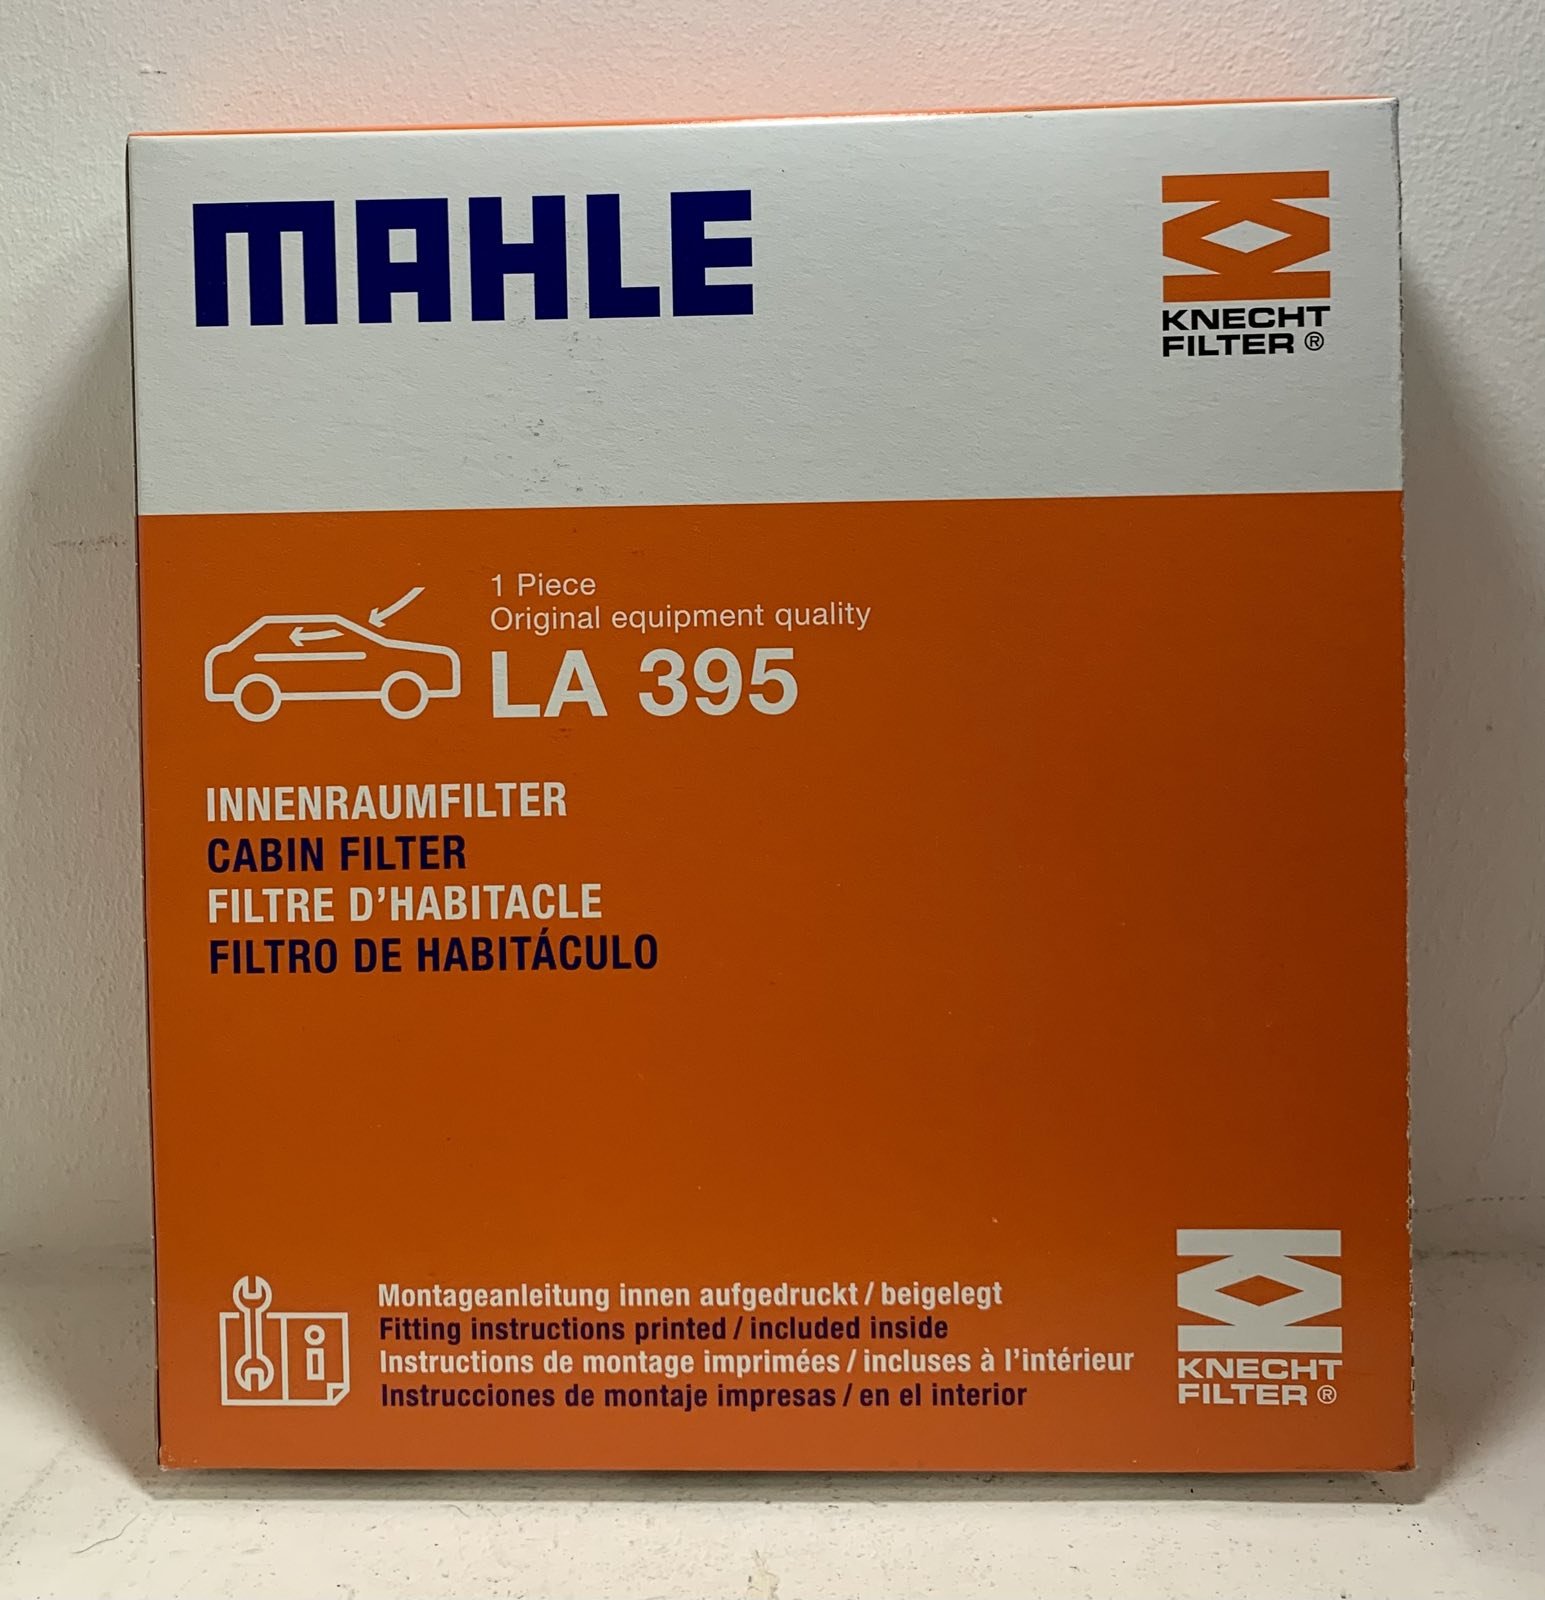 MAHLE filter